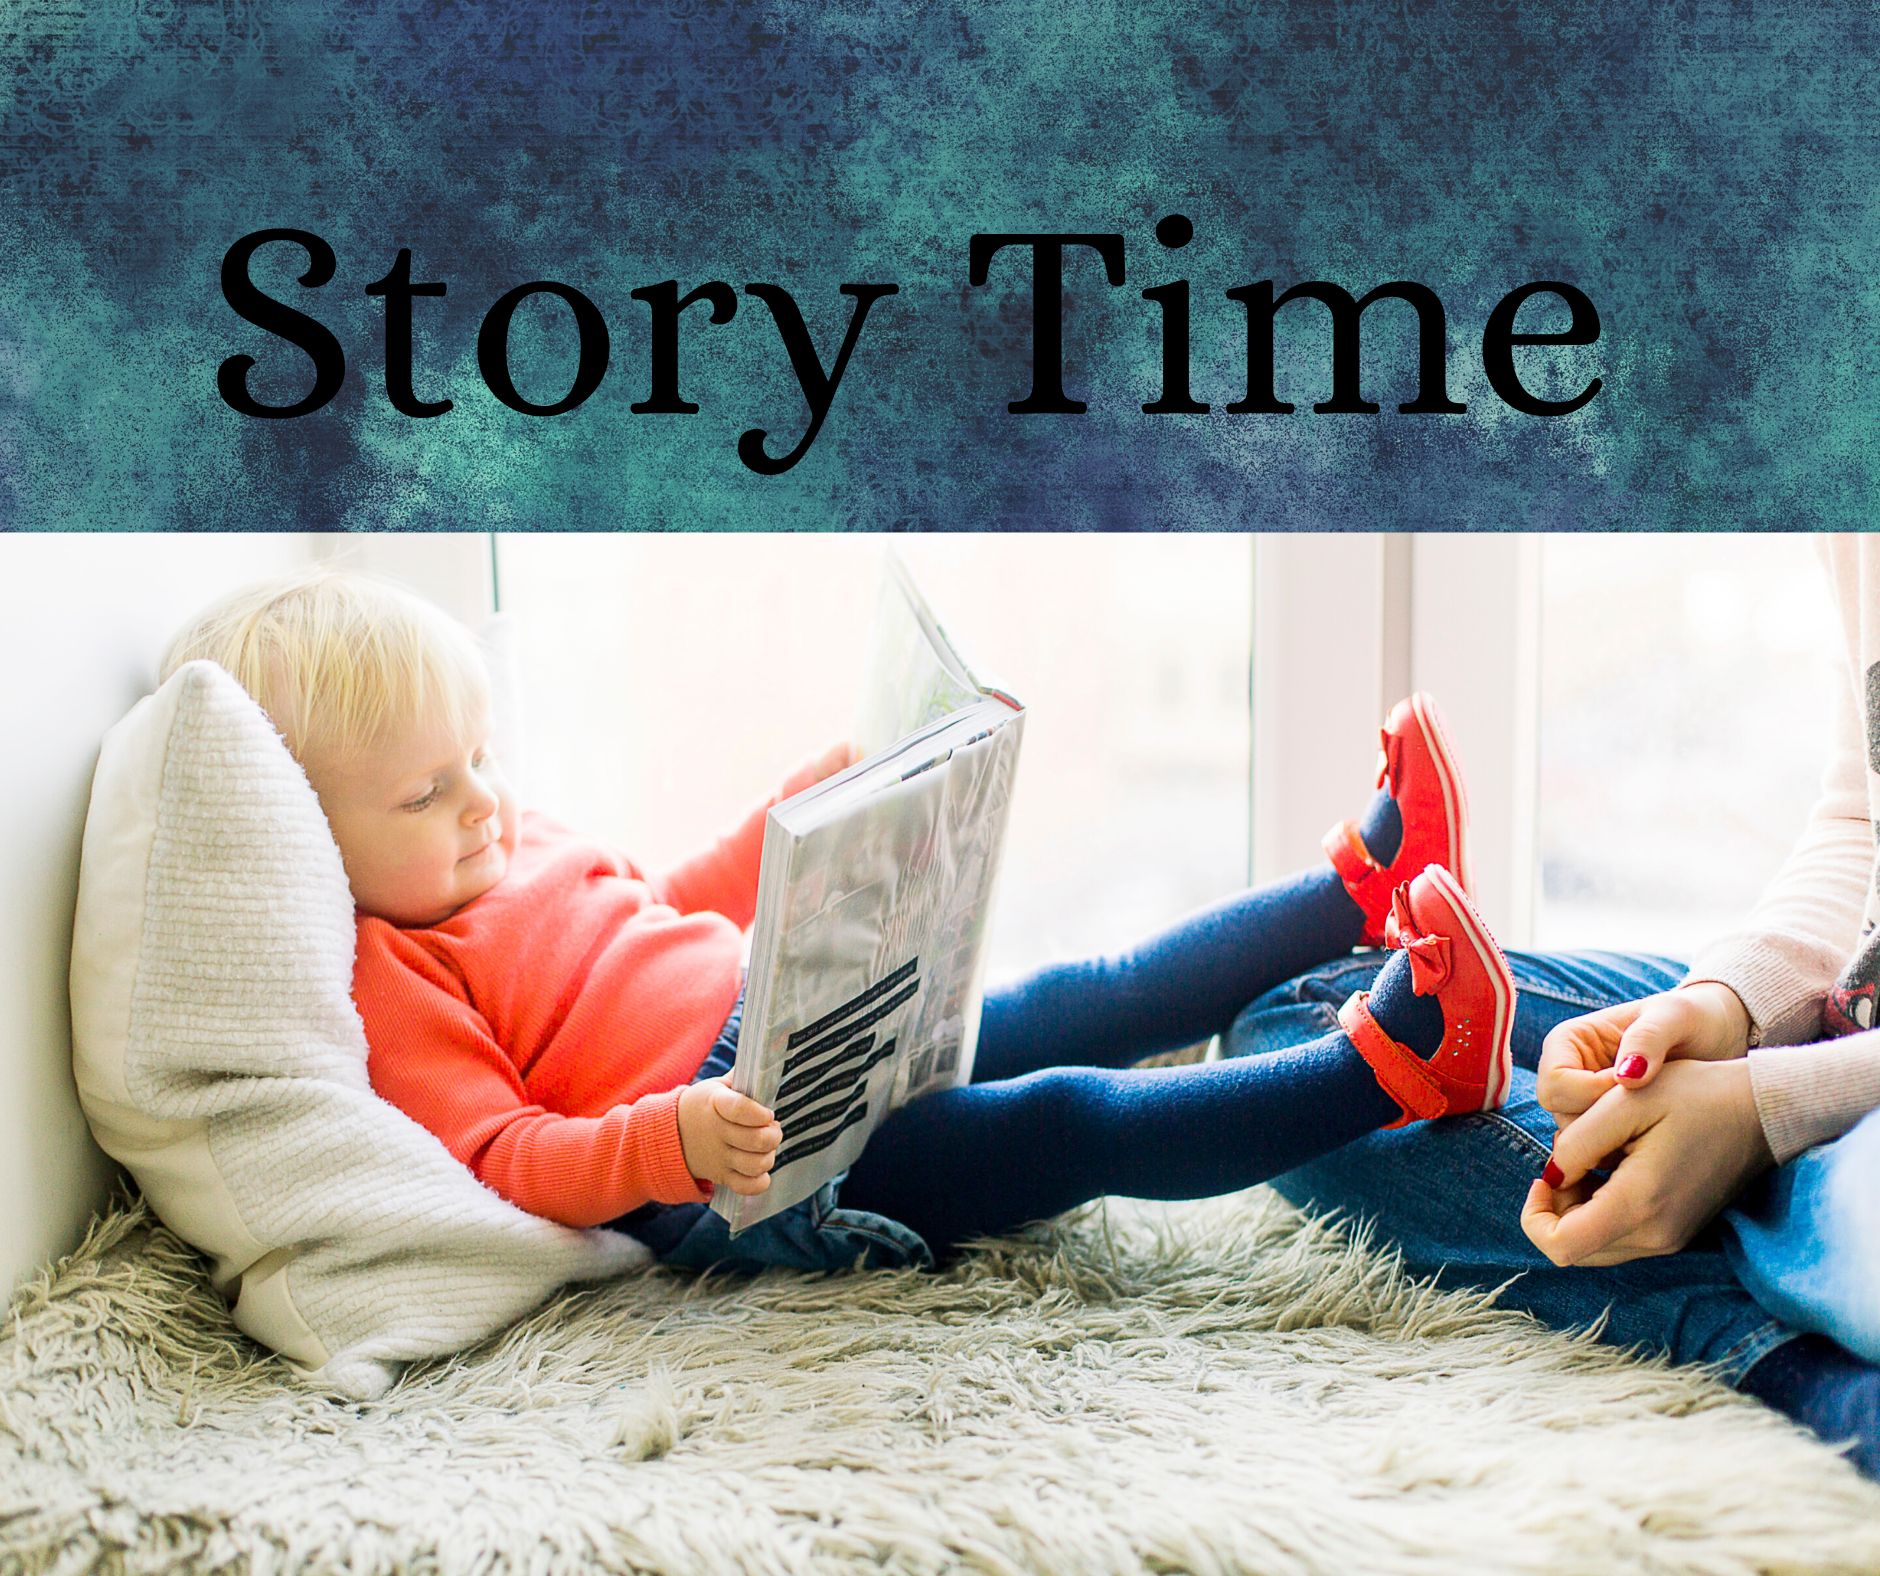 A 1 Hour Story Time experience project by Yaymaker